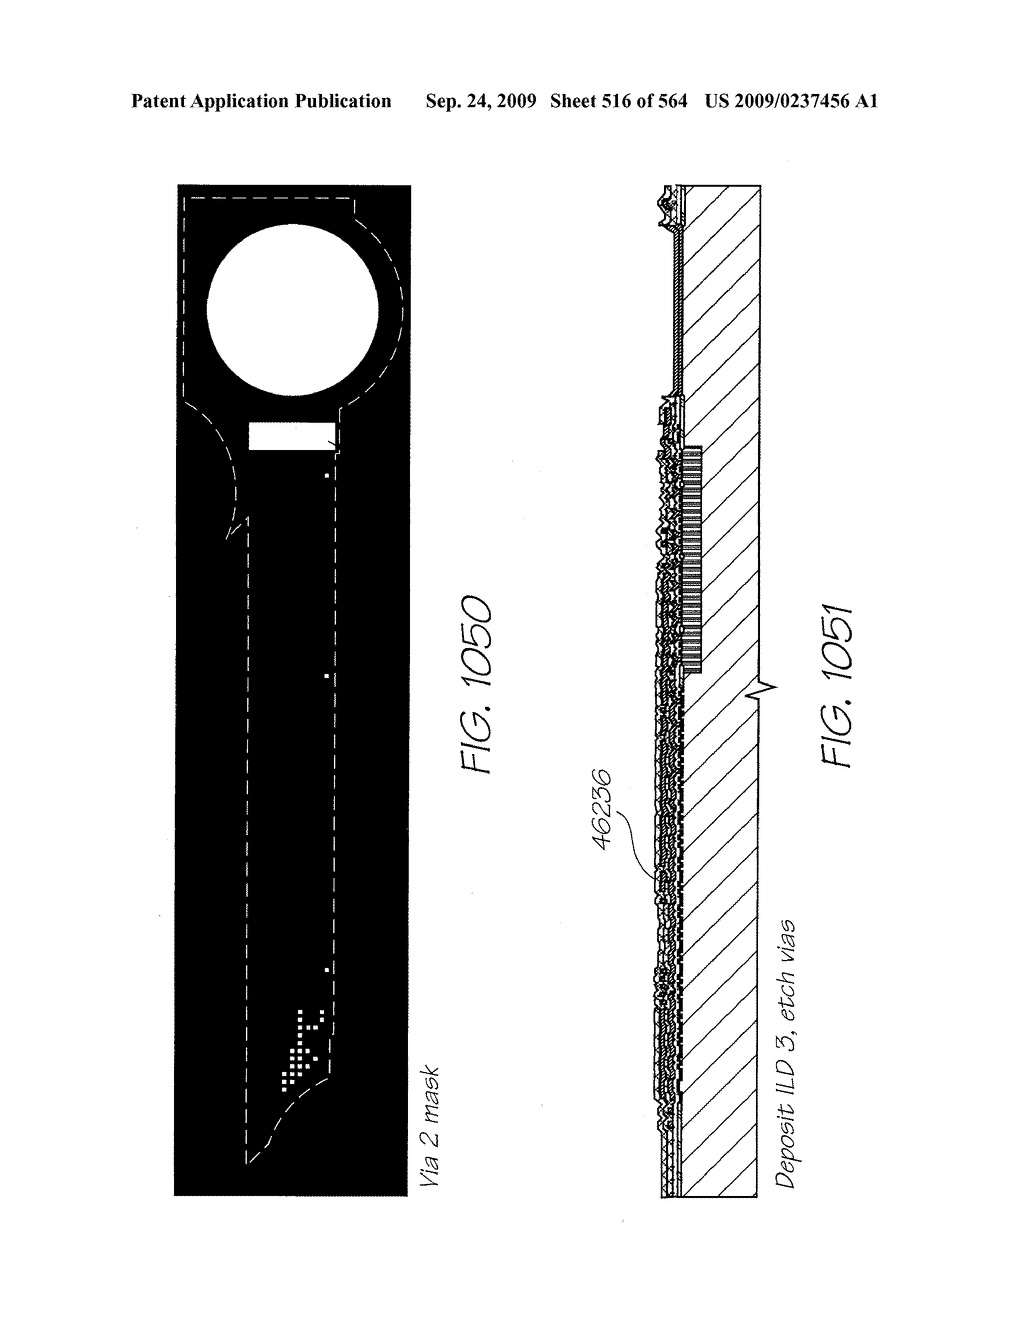 Inkjet Printhead With Paddle For Ejecting Ink From One Of Two Nozzles - diagram, schematic, and image 517